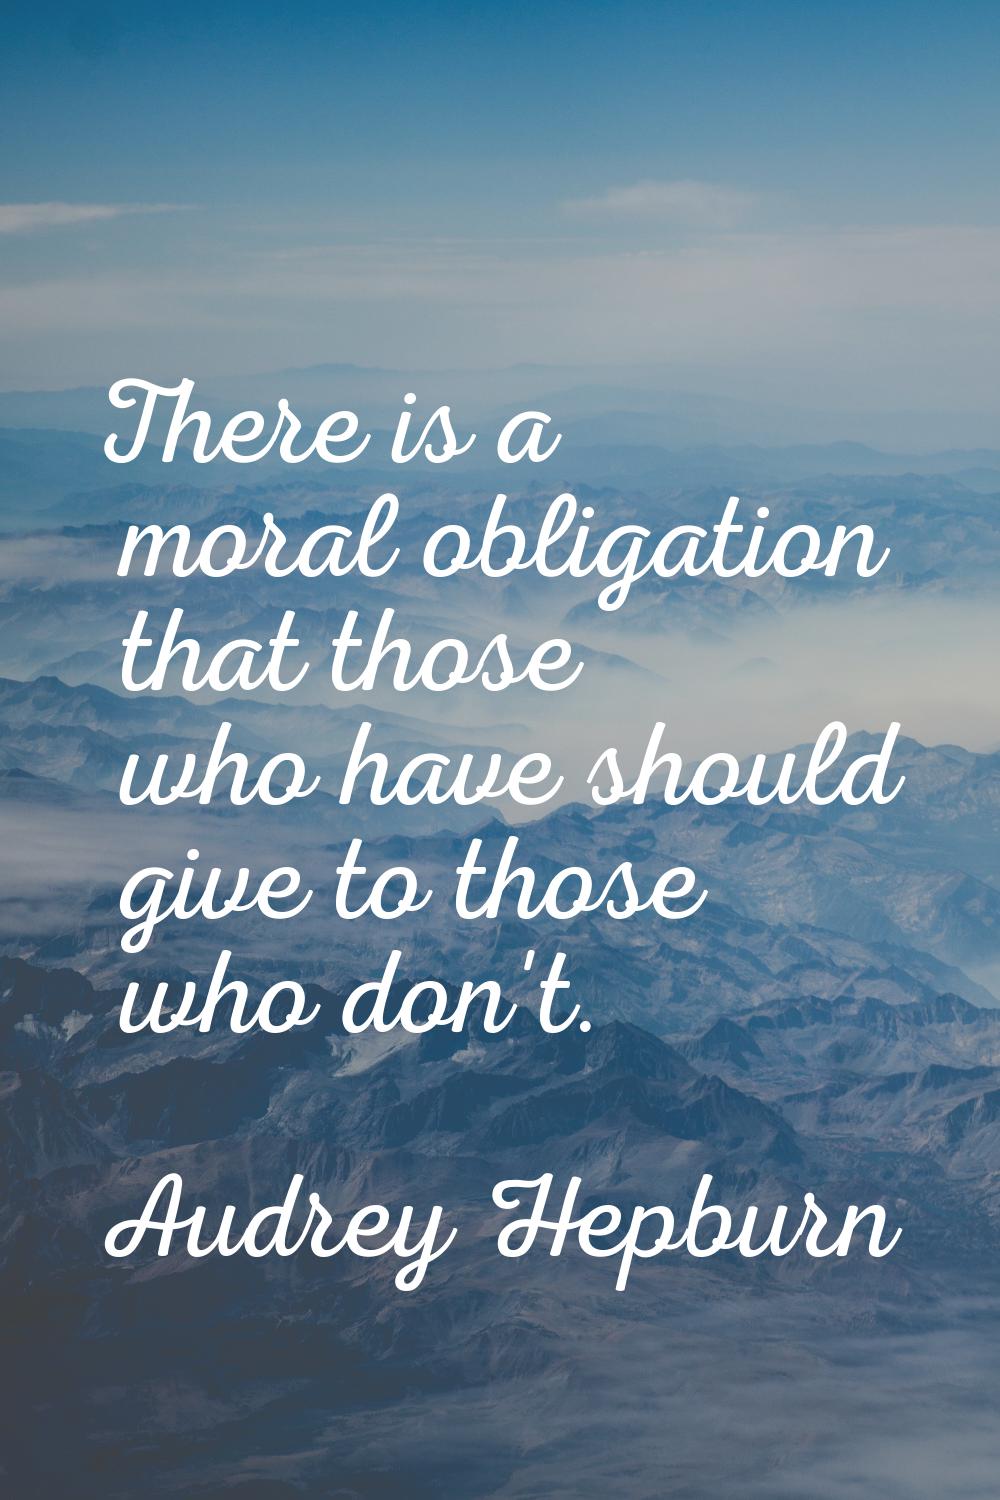 There is a moral obligation that those who have should give to those who don't.